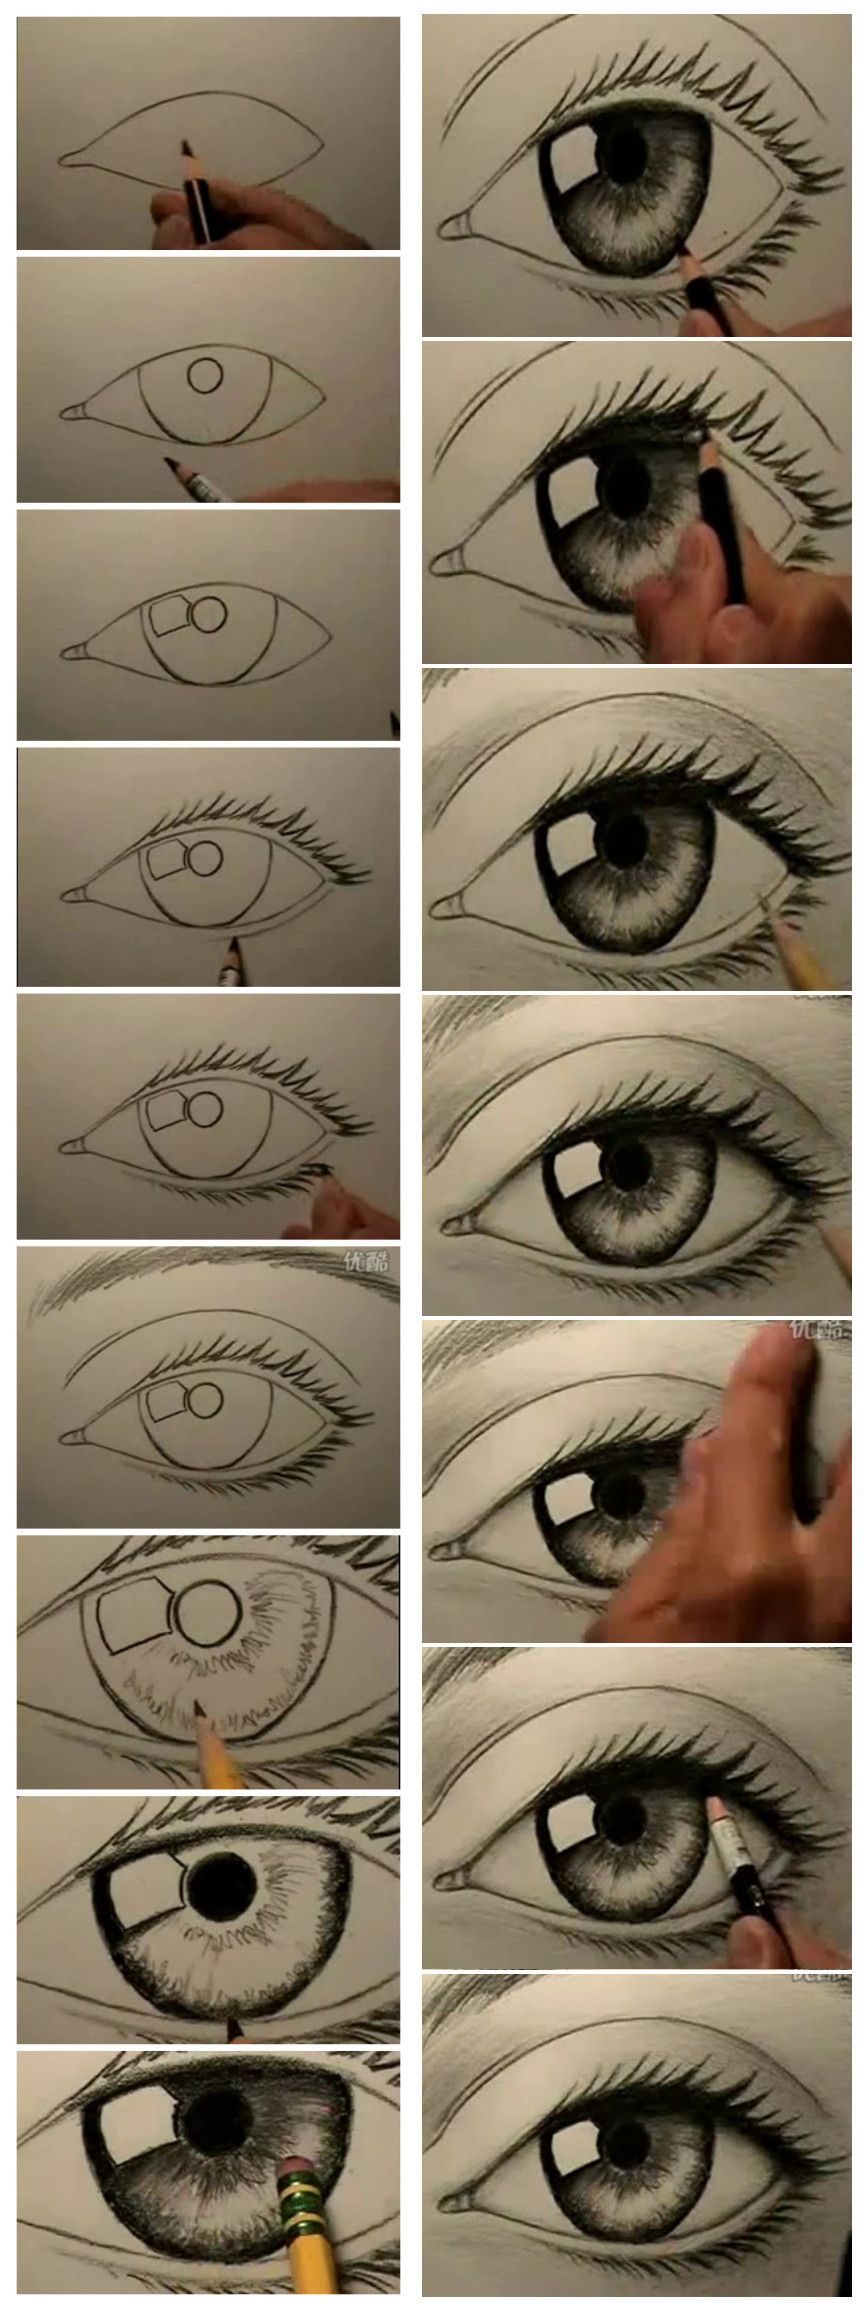 How to draw an eye.